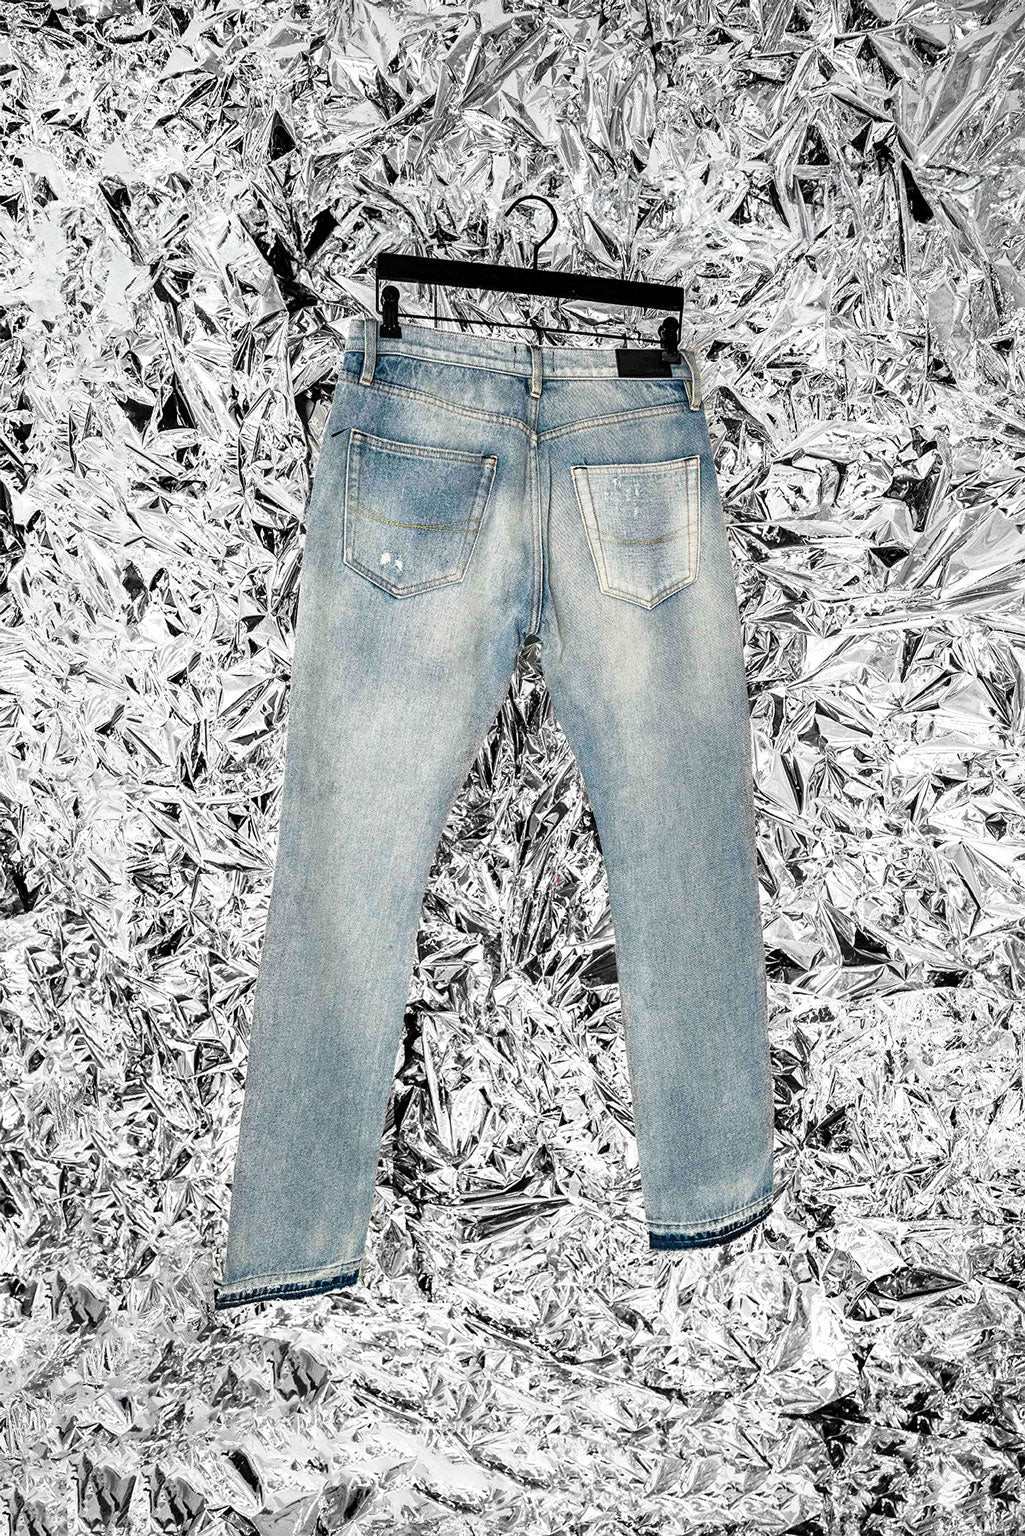 BLUE DISTRESSED JEANS